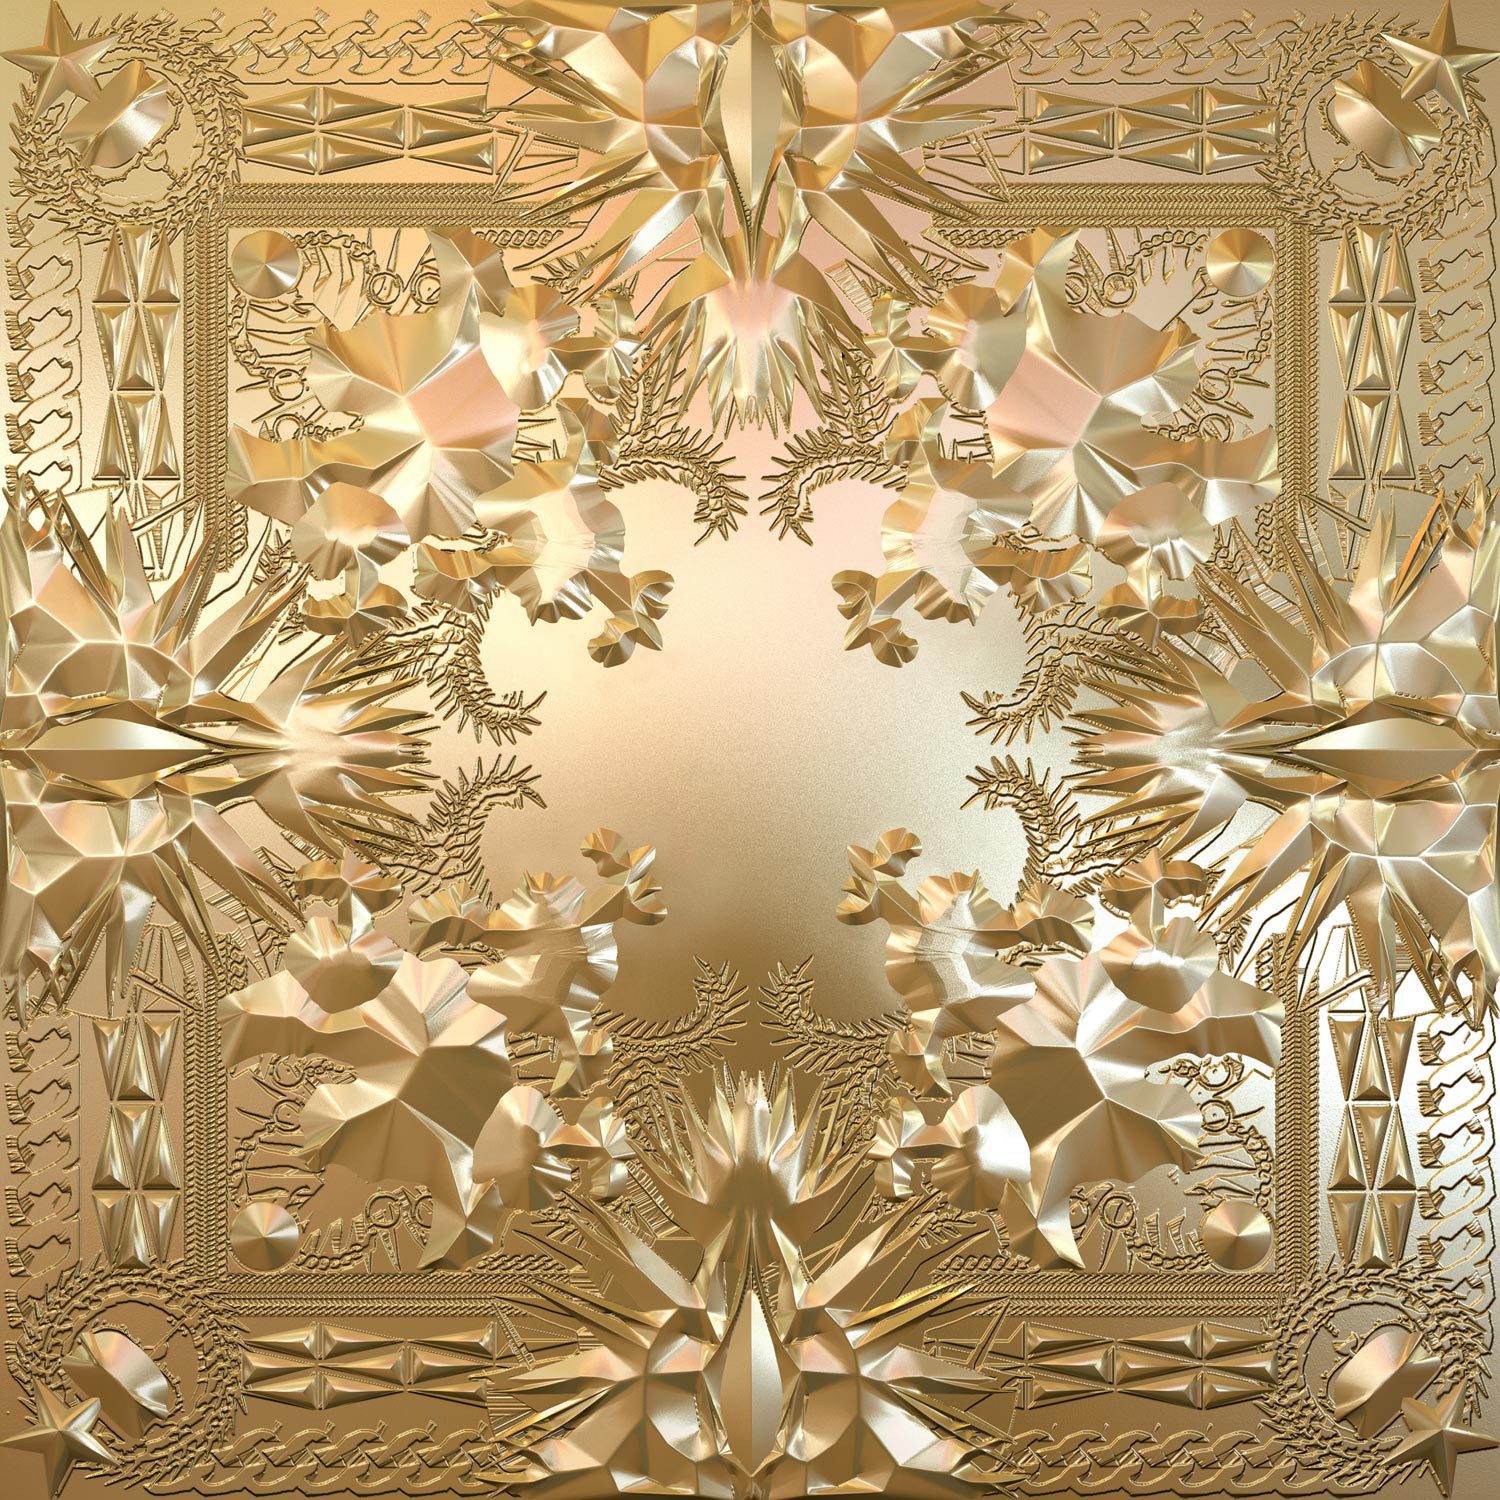 Watch the throne deluxe download